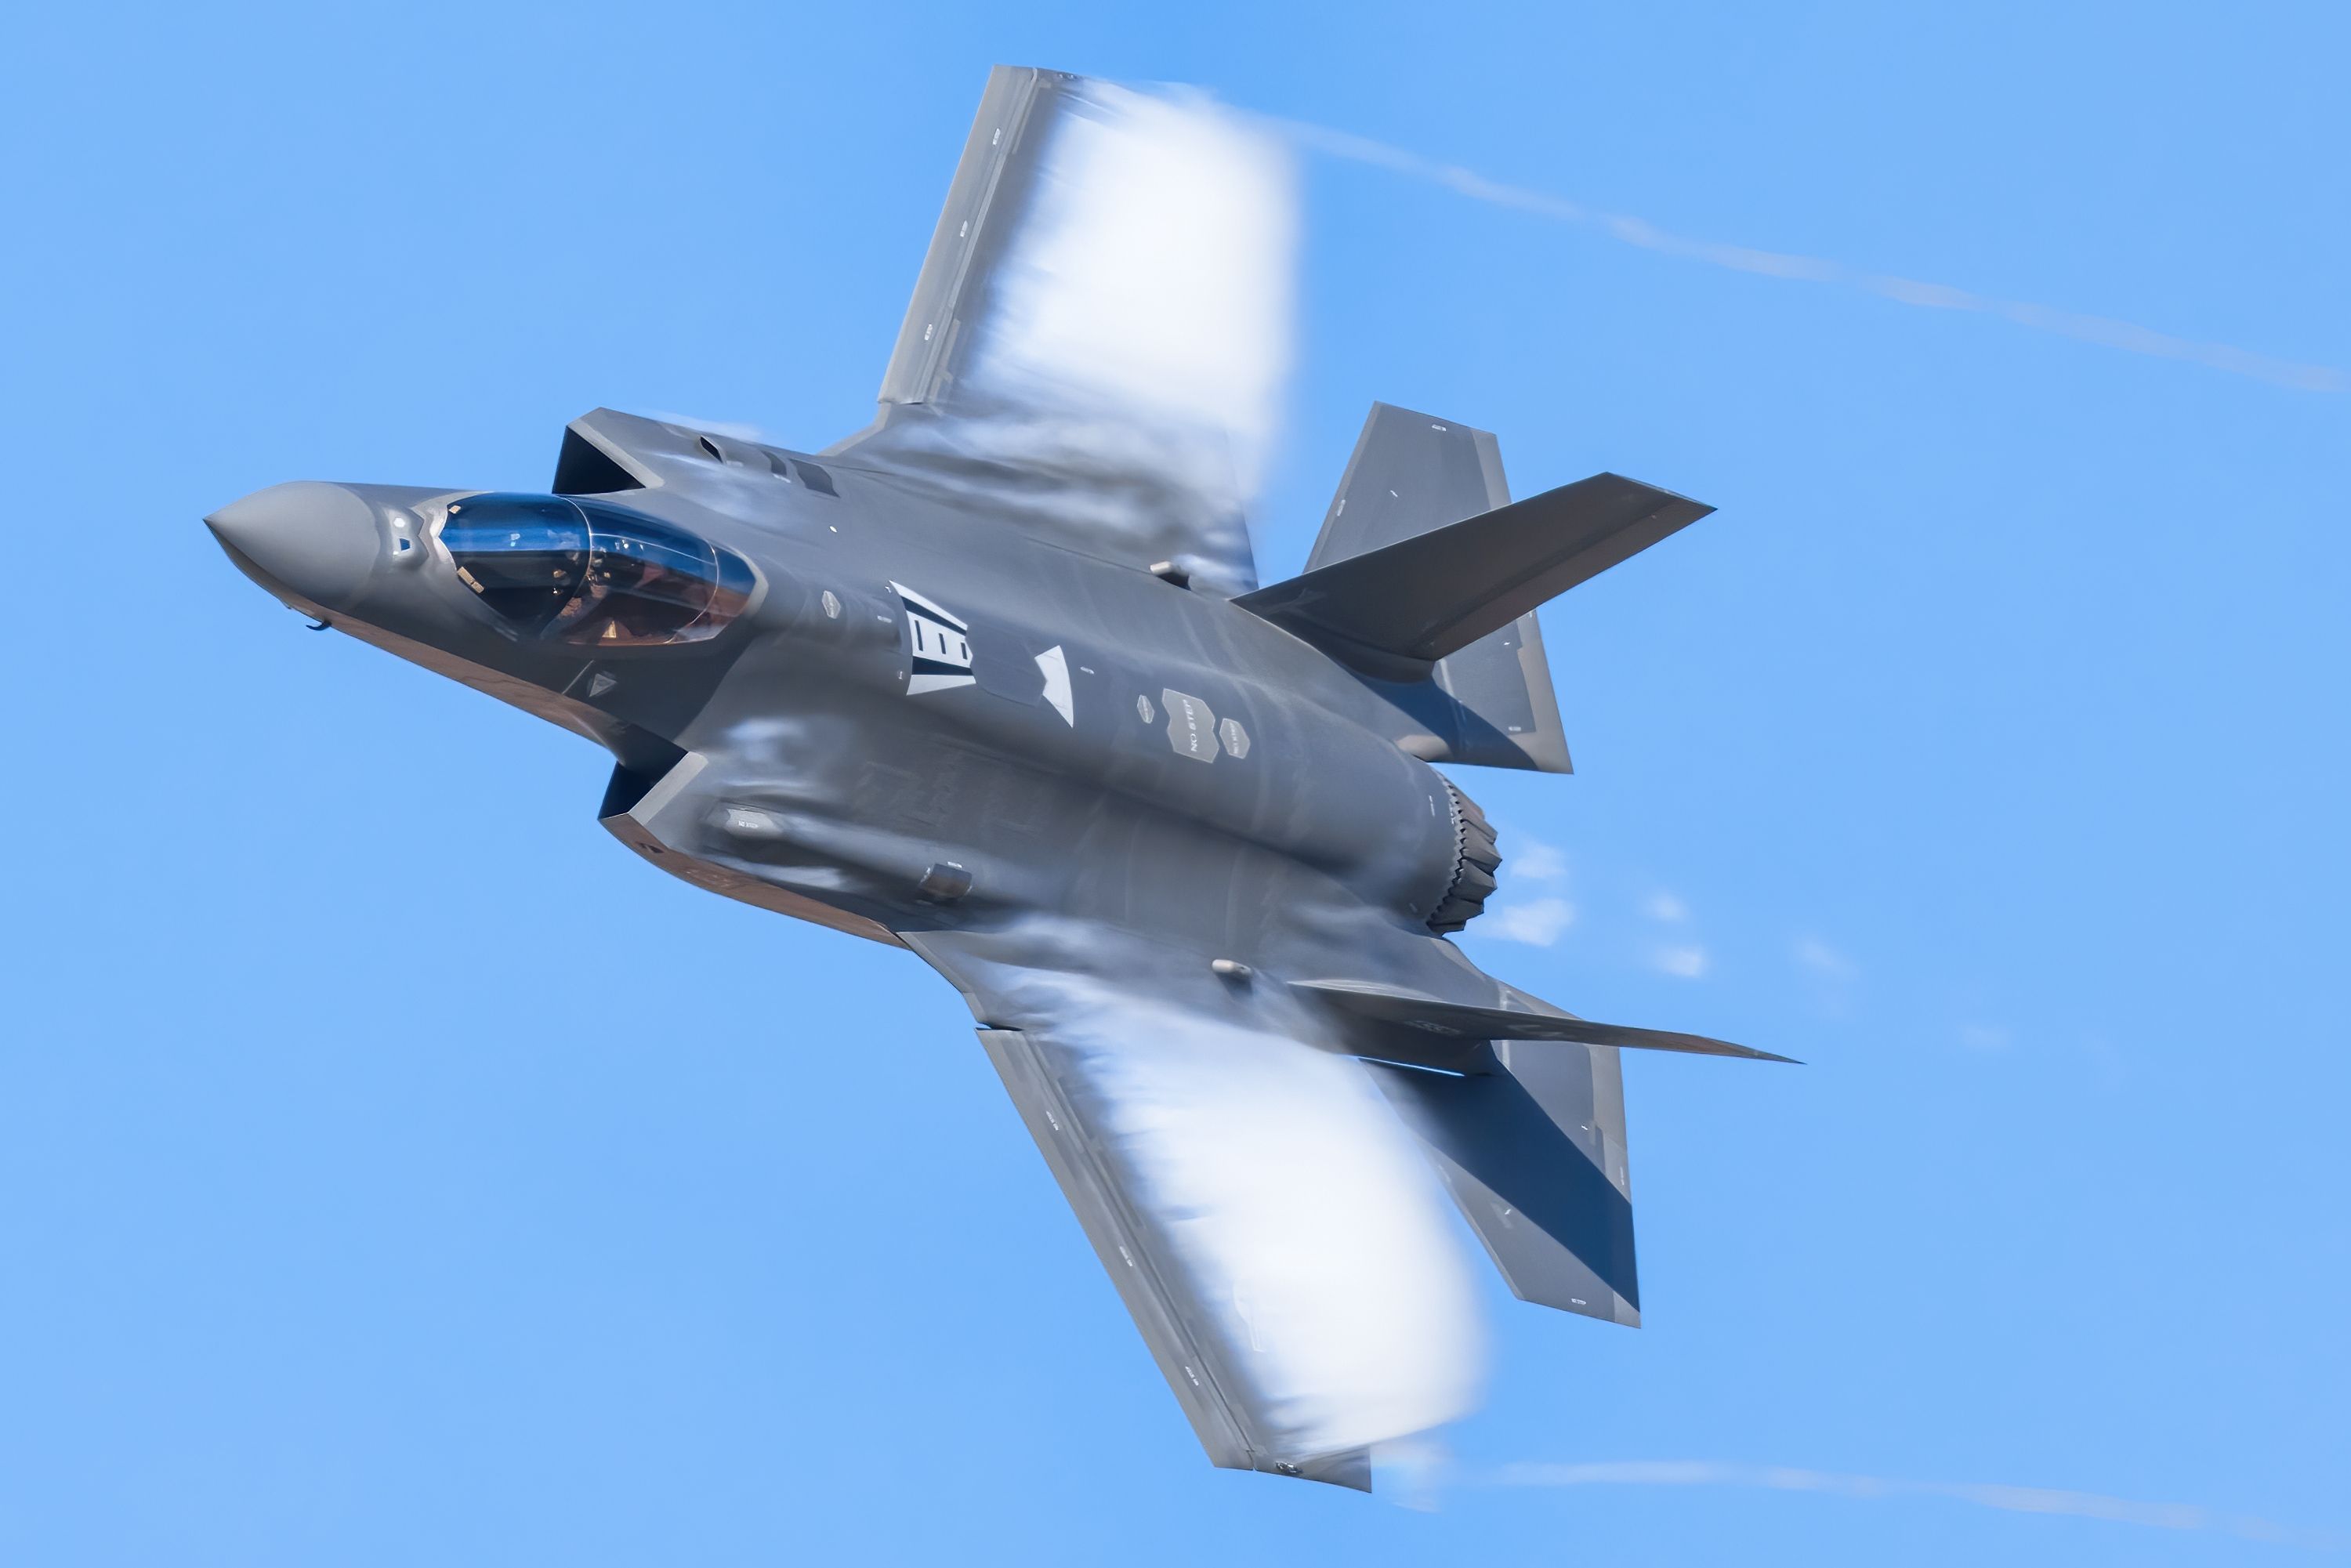 A US Air Force Lockheed Martin F-35A Lightning II flying in the sky.